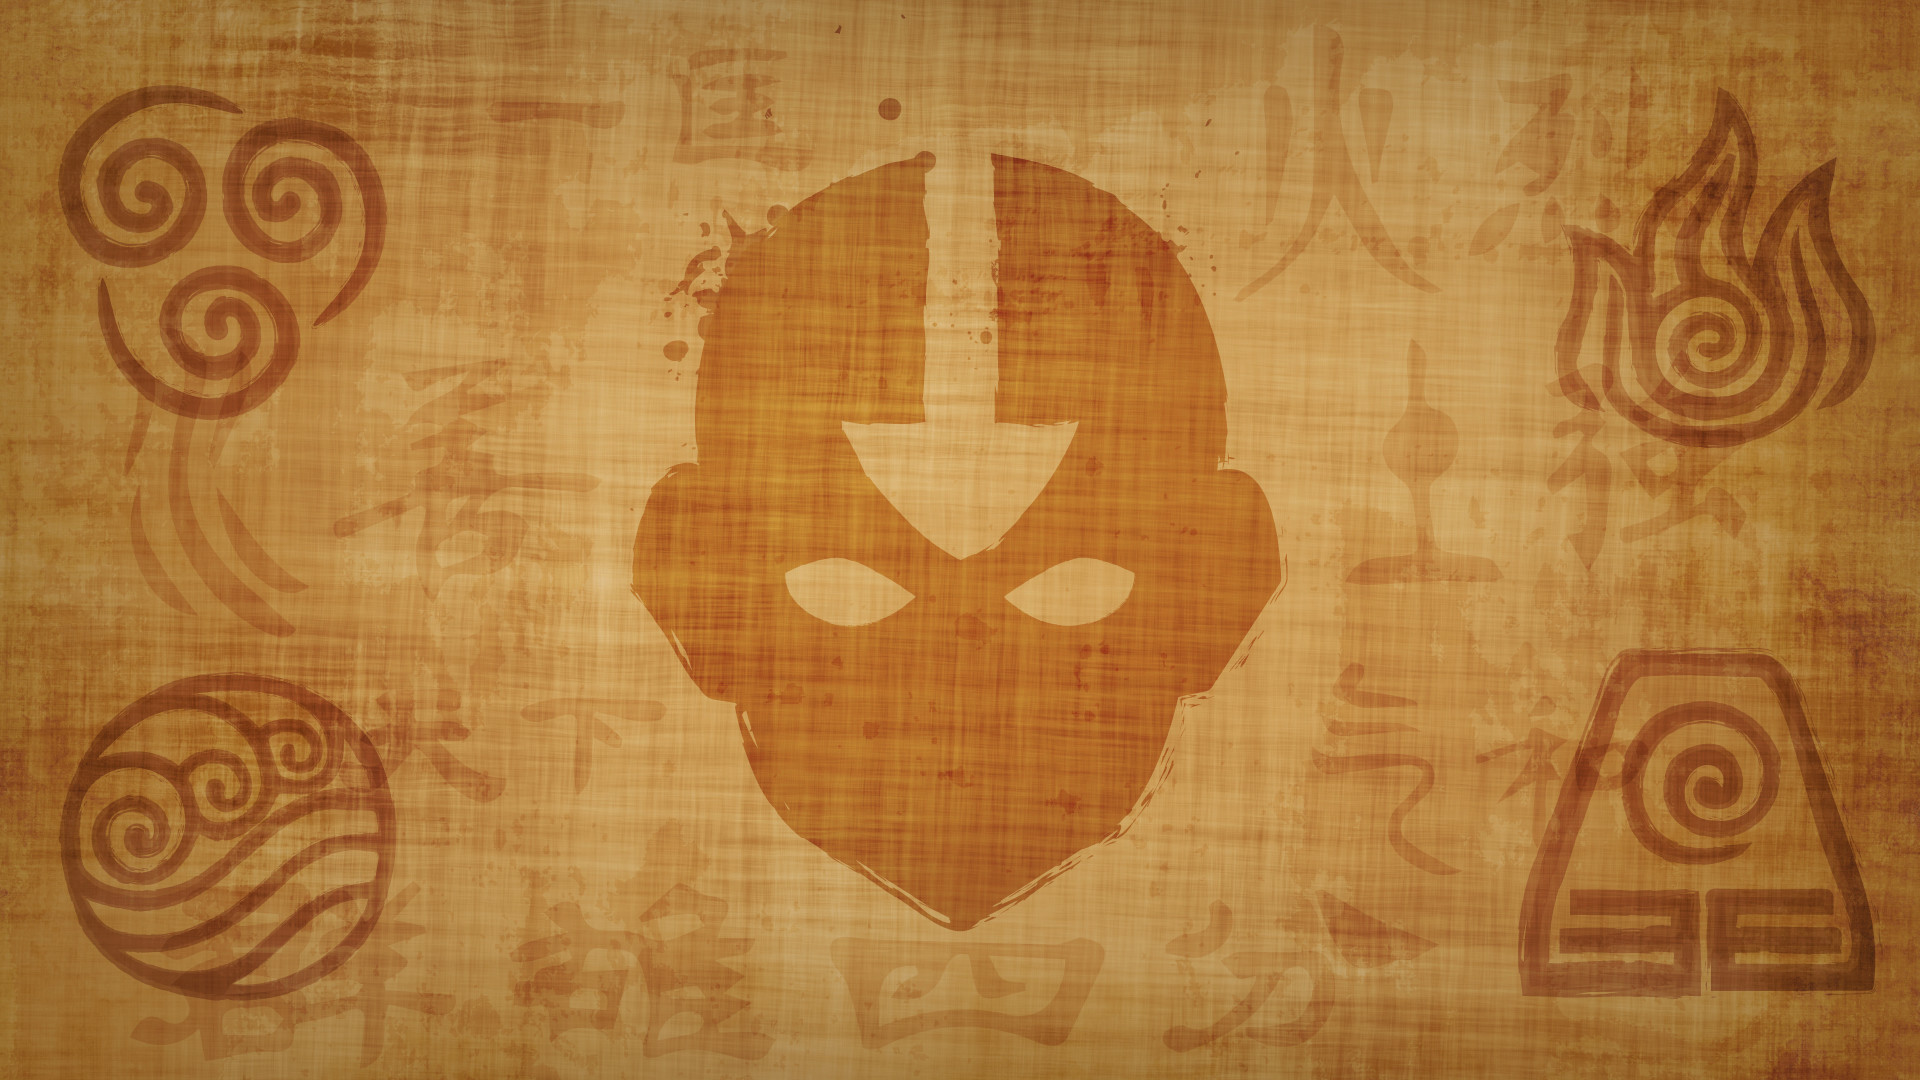 Avatar The Last Airbender Wallpapers.